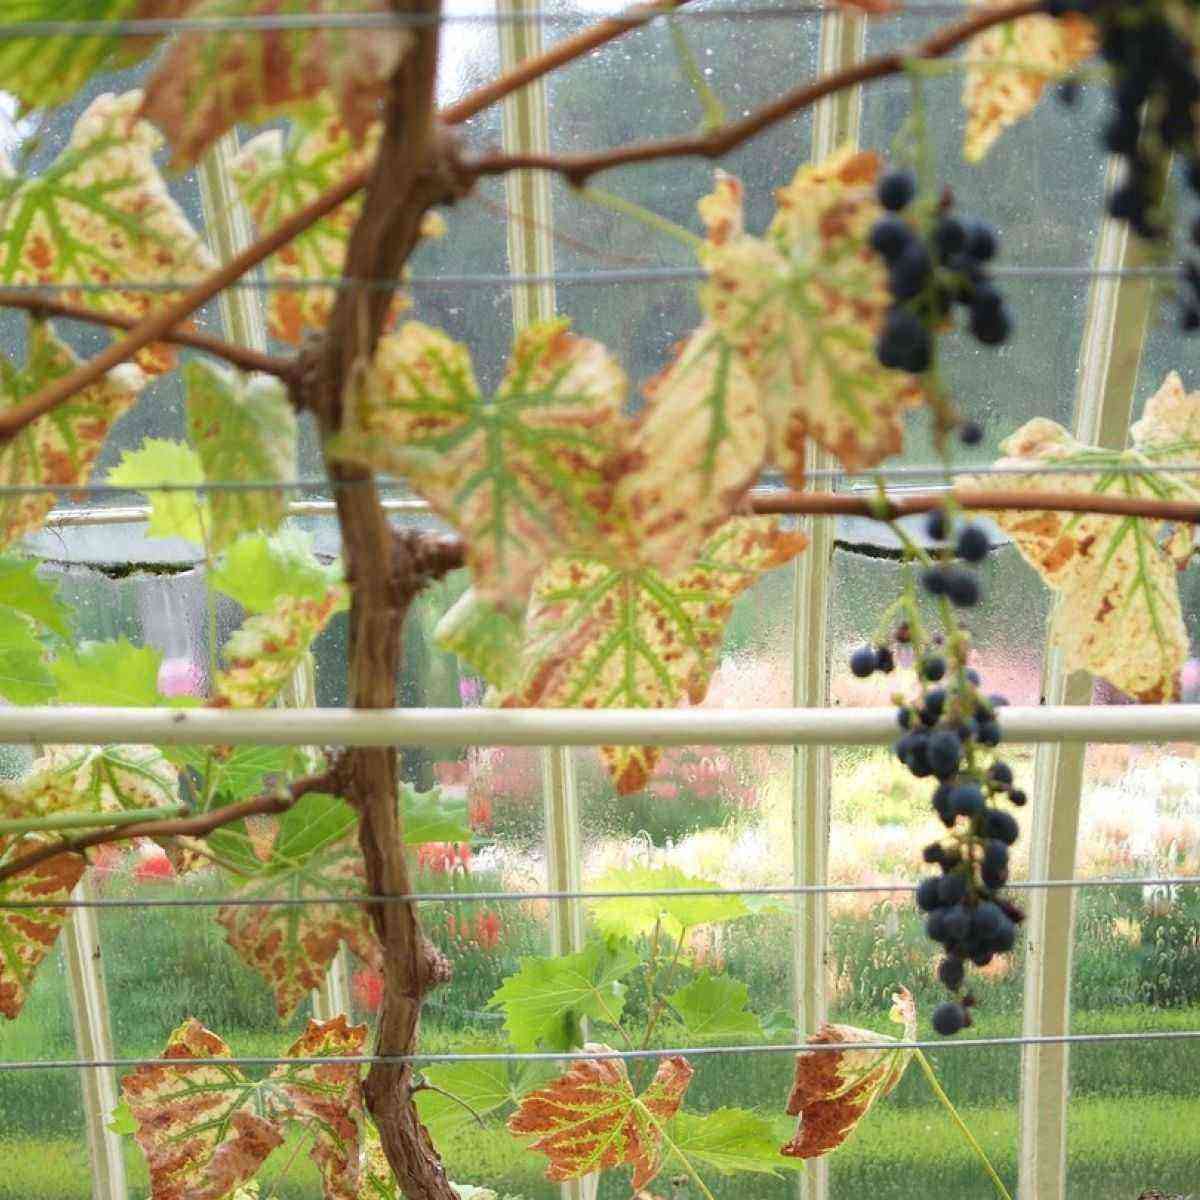 The nuances of grape propagation by layering